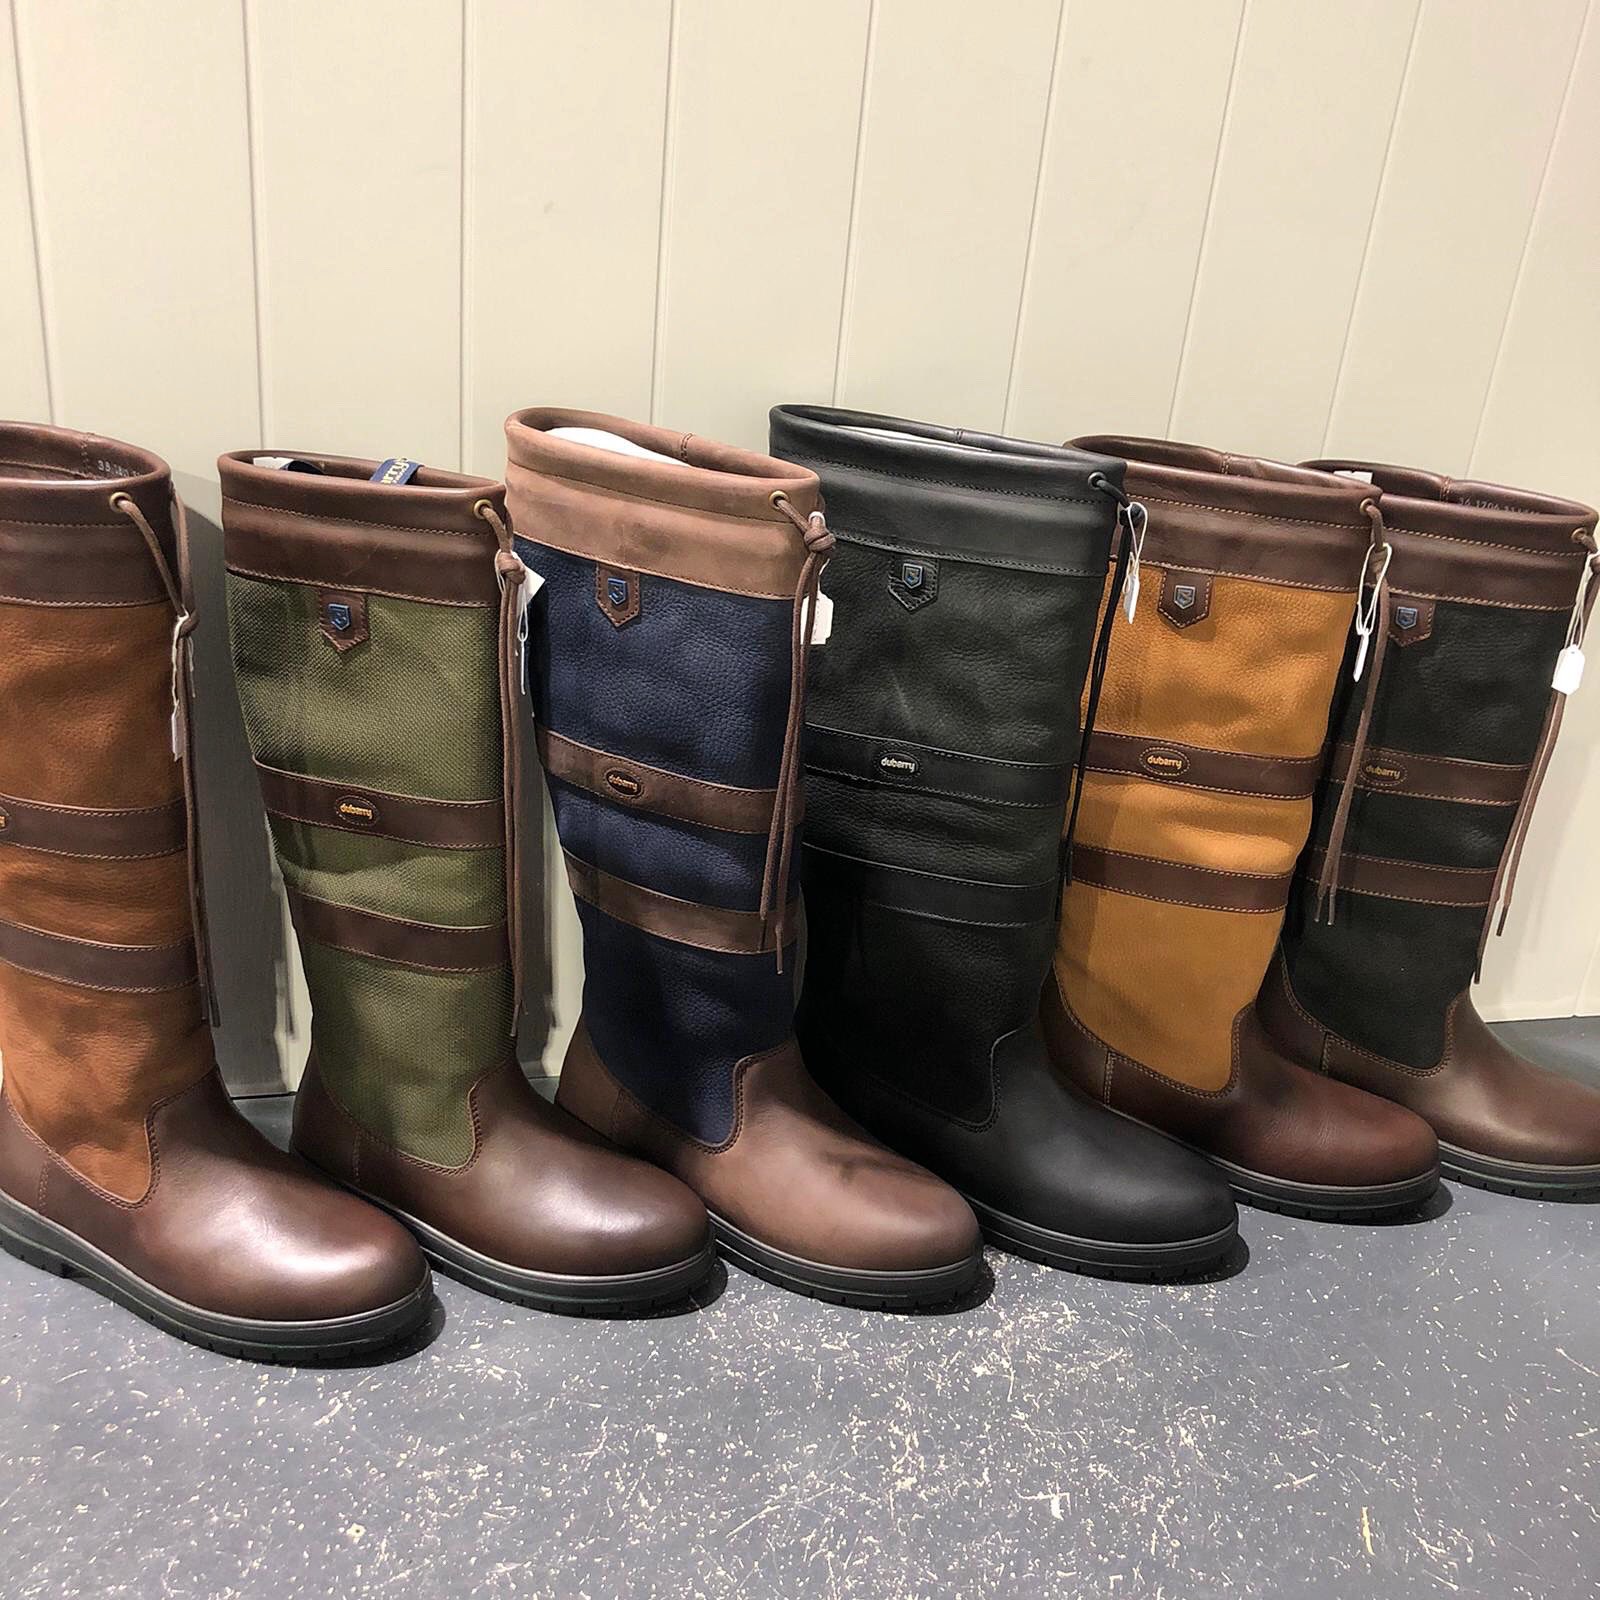 A Farley Country Attire on Twitter: "🌟 FOR A LIMITED 🌟 buy any colour Dubarry Galway Boot and get a FREE Dubarry Care Trial pack 🤩 GO go go https://t.co/kMZxxNc6Kl" /